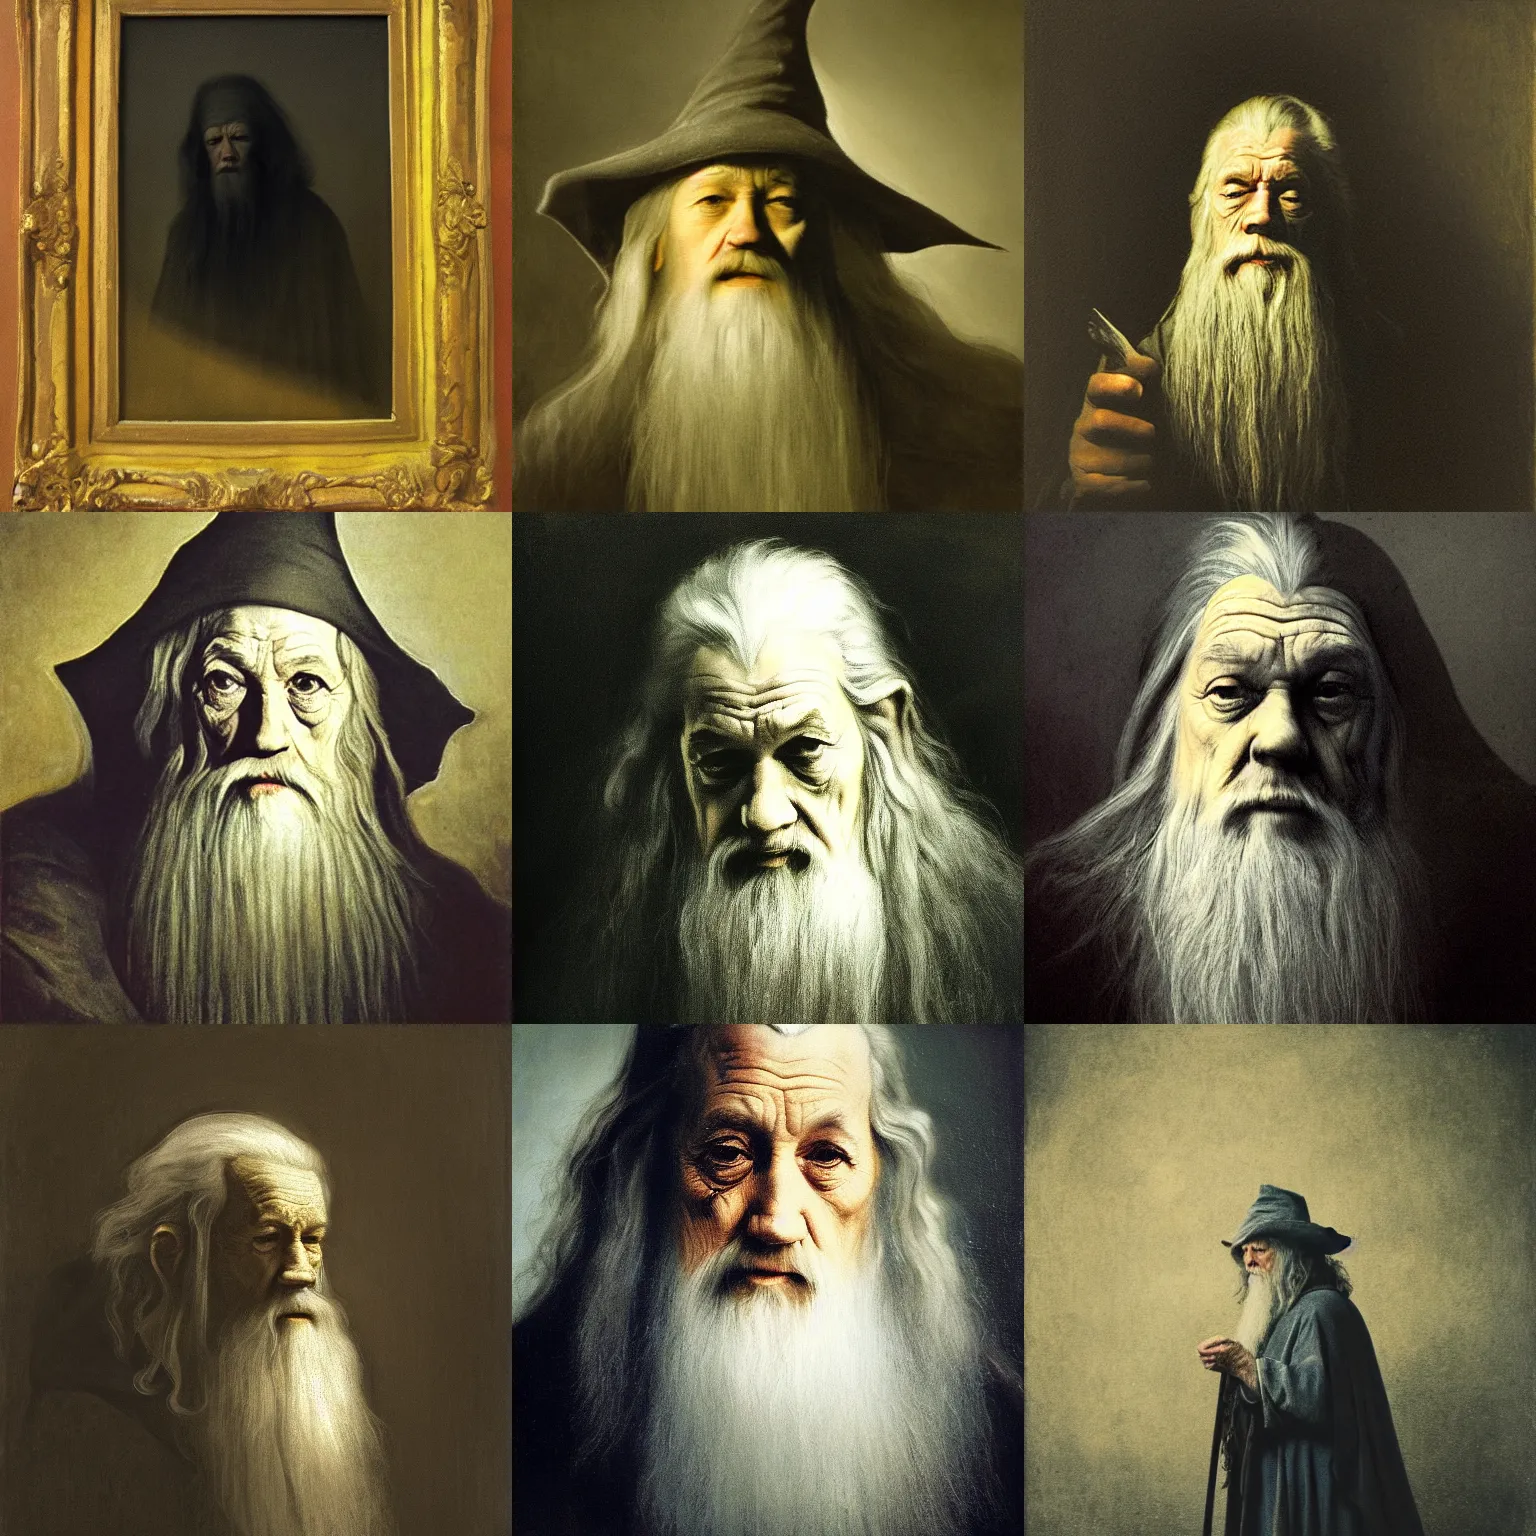 Prompt: portrait of | | gandalf, the gray | | ( melancholic, thoughtful ), | | low key lighting | |, dark bacgkground, oil canvas by rembrandt